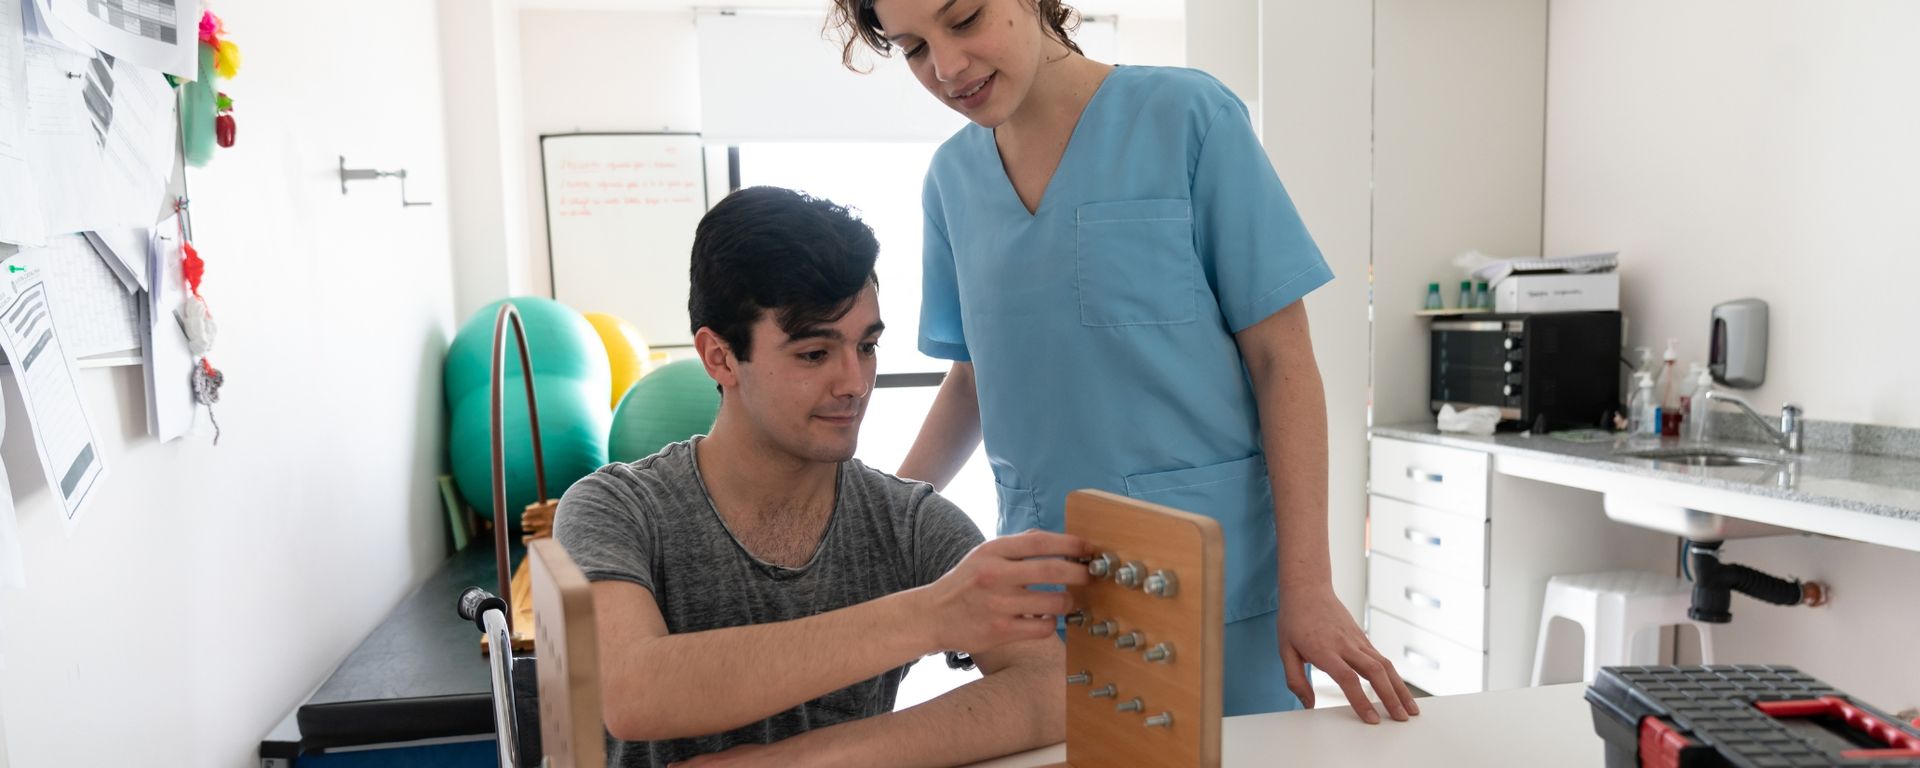 Female occupational therapist assisting a male patient